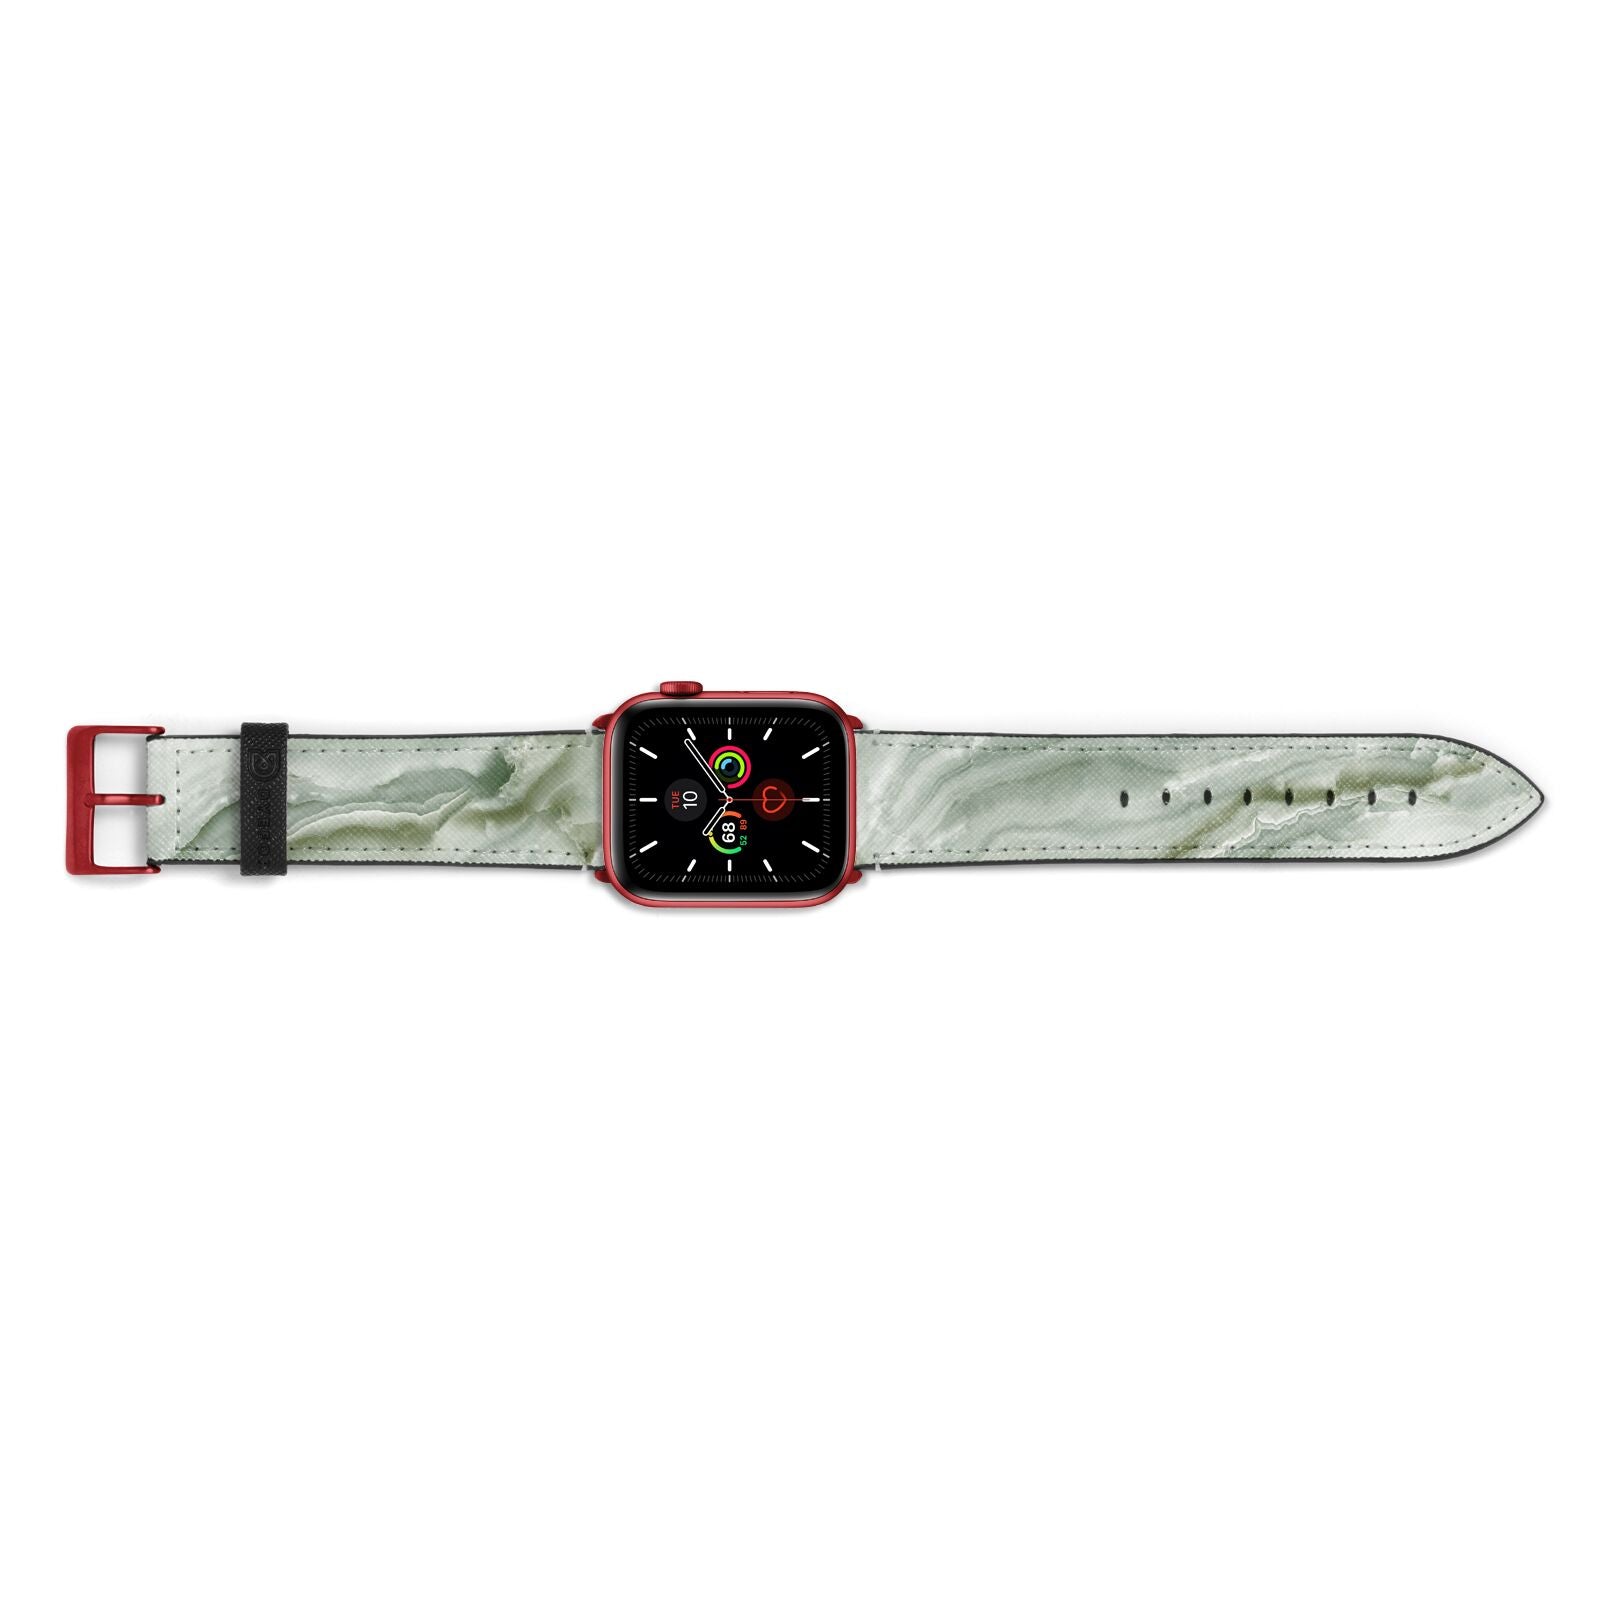 Pistachio Green Marble Apple Watch Strap Landscape Image Red Hardware